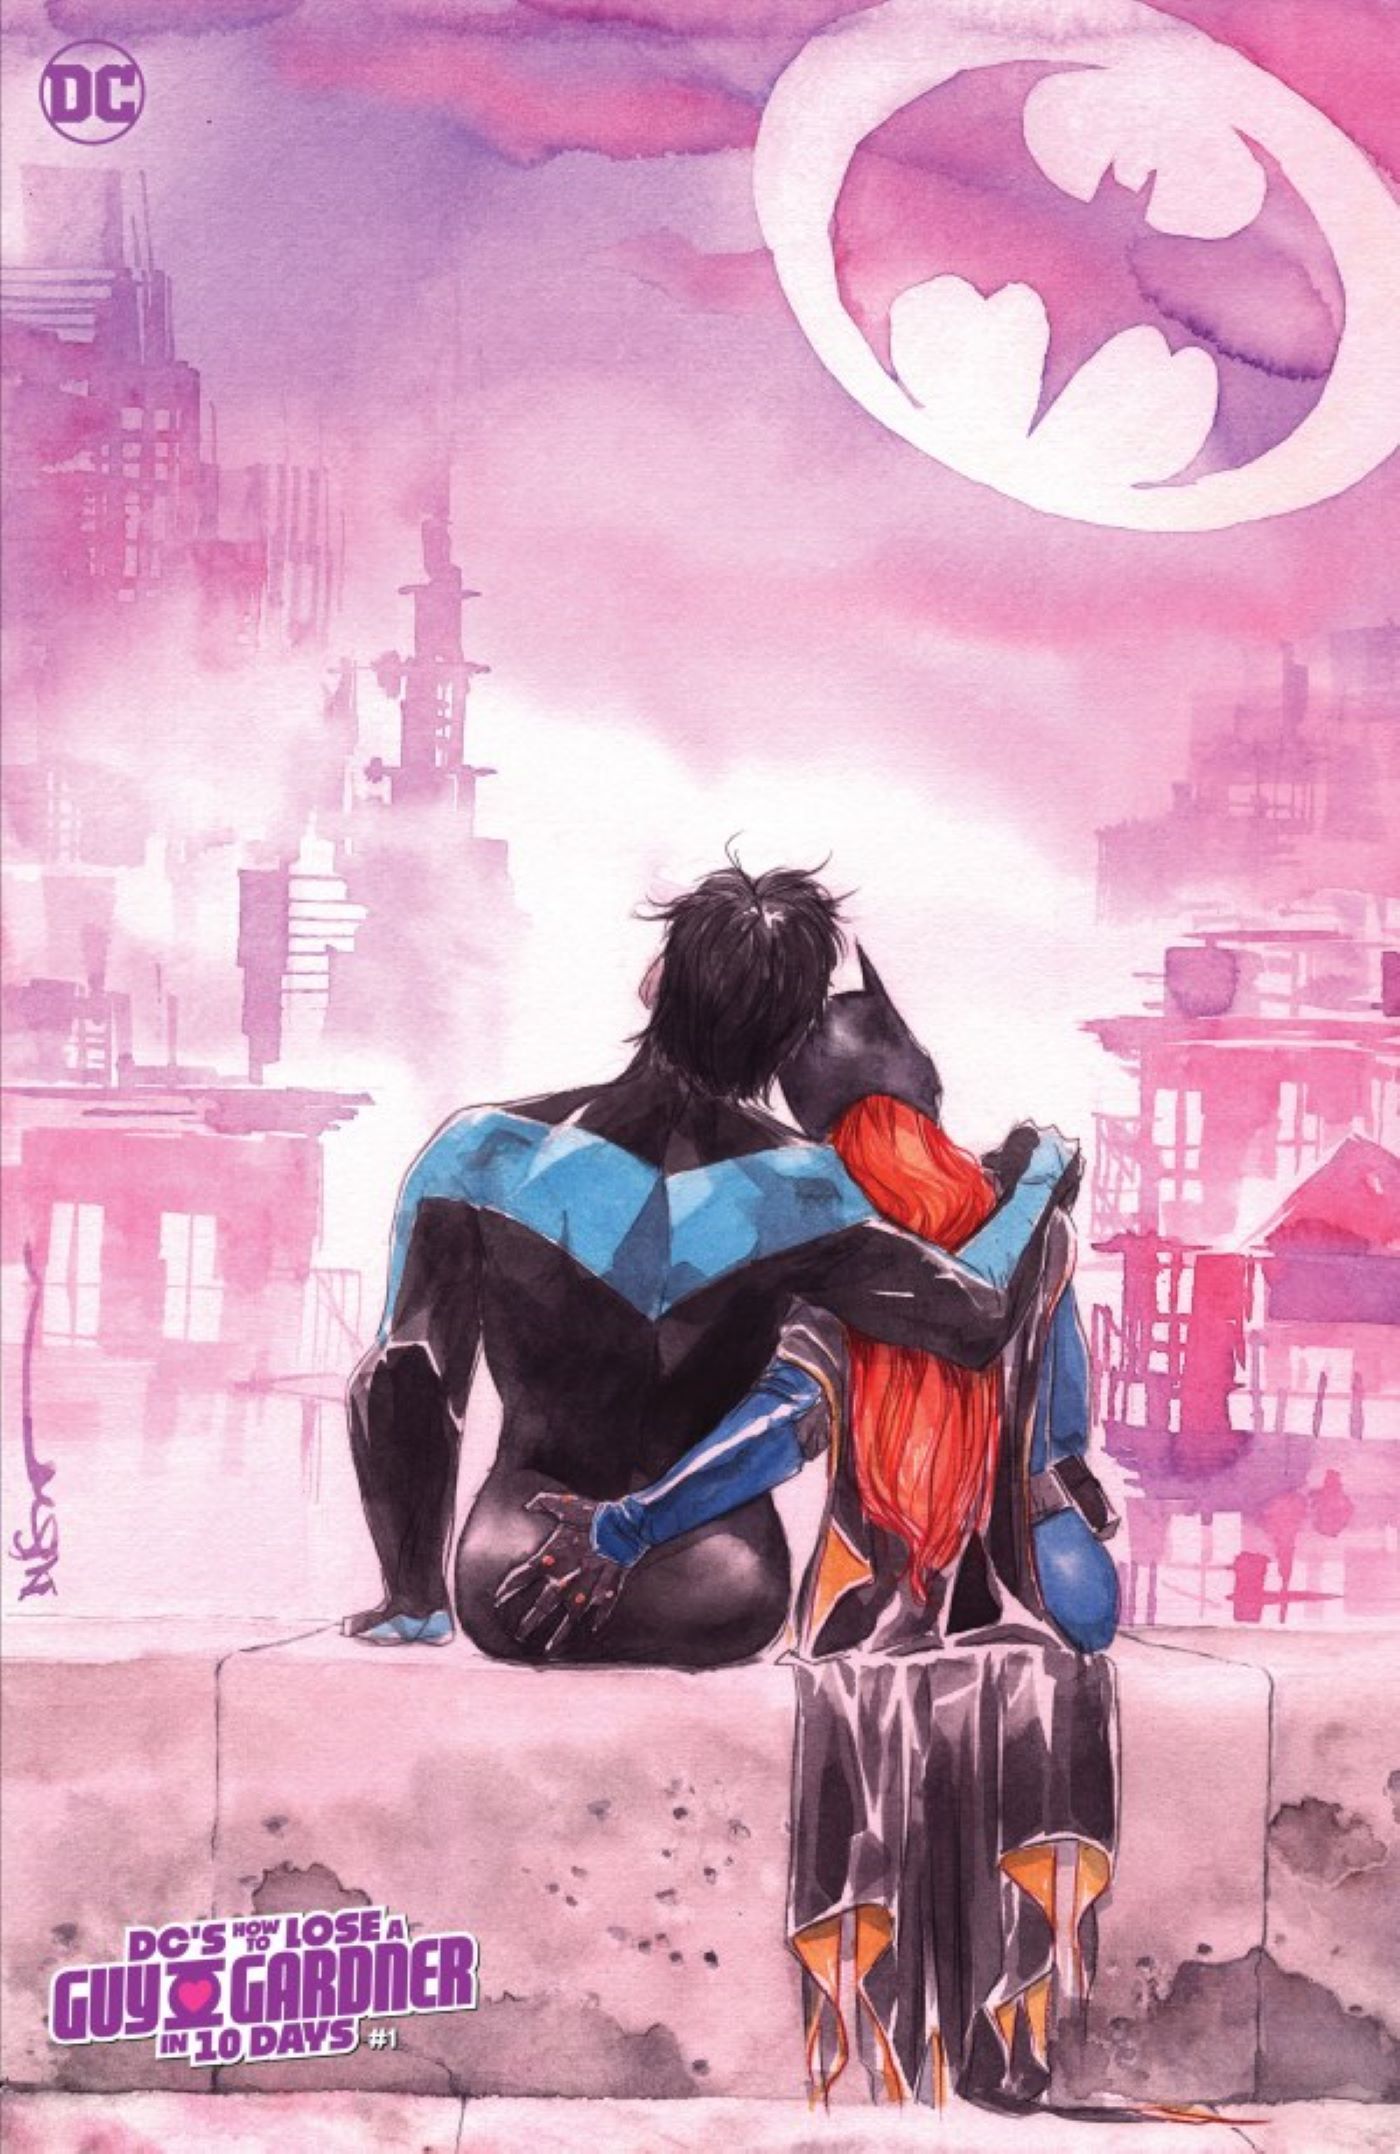 Nightwing & Batgirl Just Proved They’re DC’s Ultimate Hero Romance